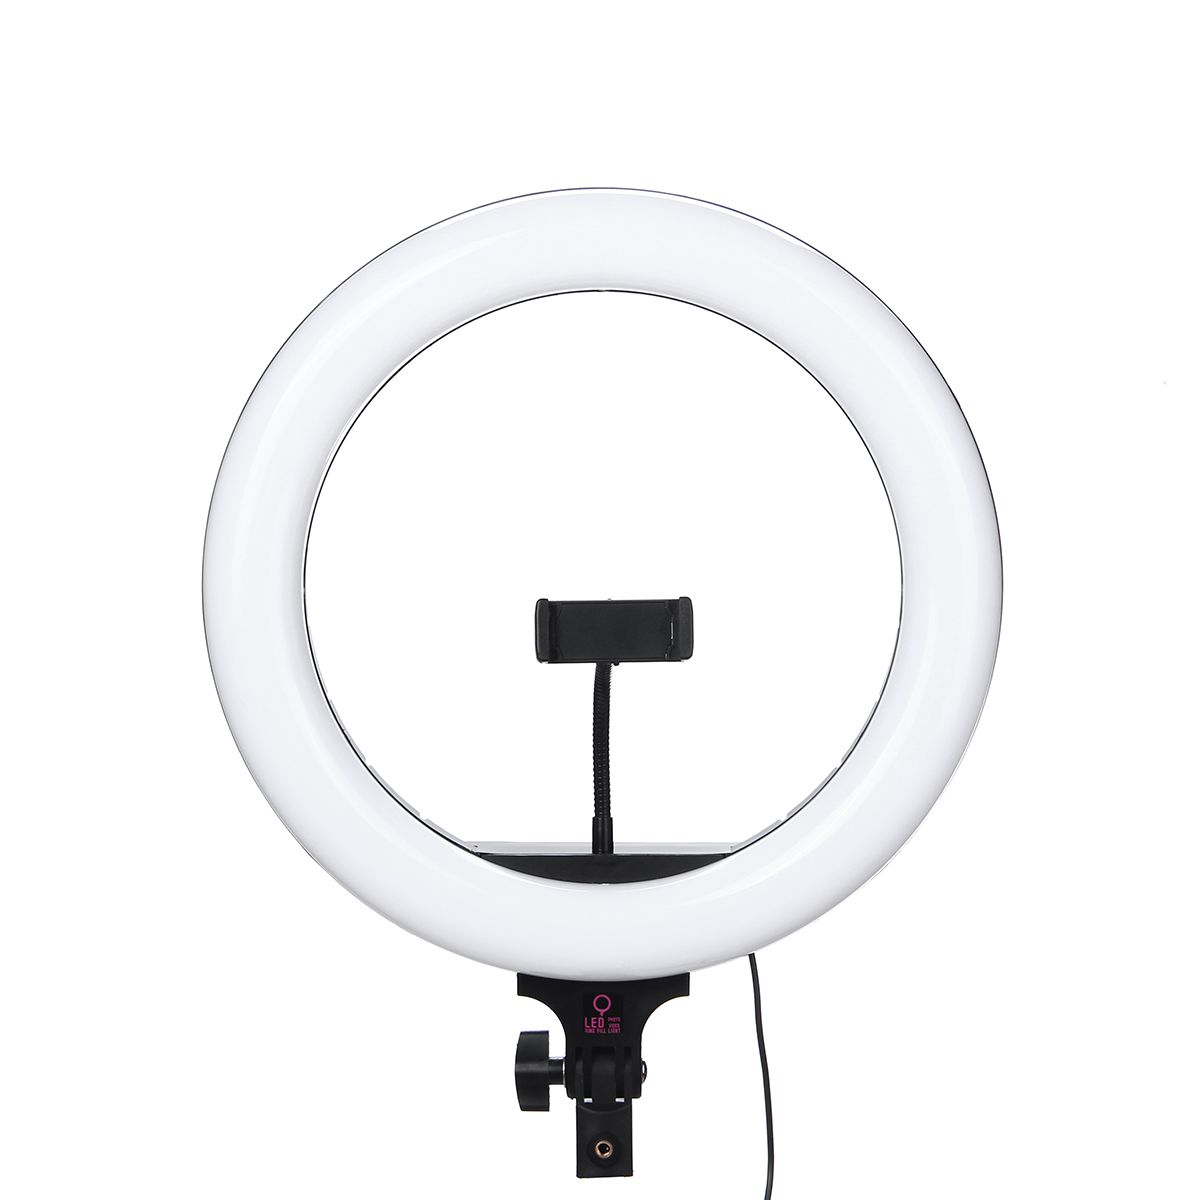 710131518-Inch-LED-Ring-Light-Studio-Fill-Light-Tripod-Stand-Photo-Makeup-Live-Dimmable-Lamp-for-You-1708205